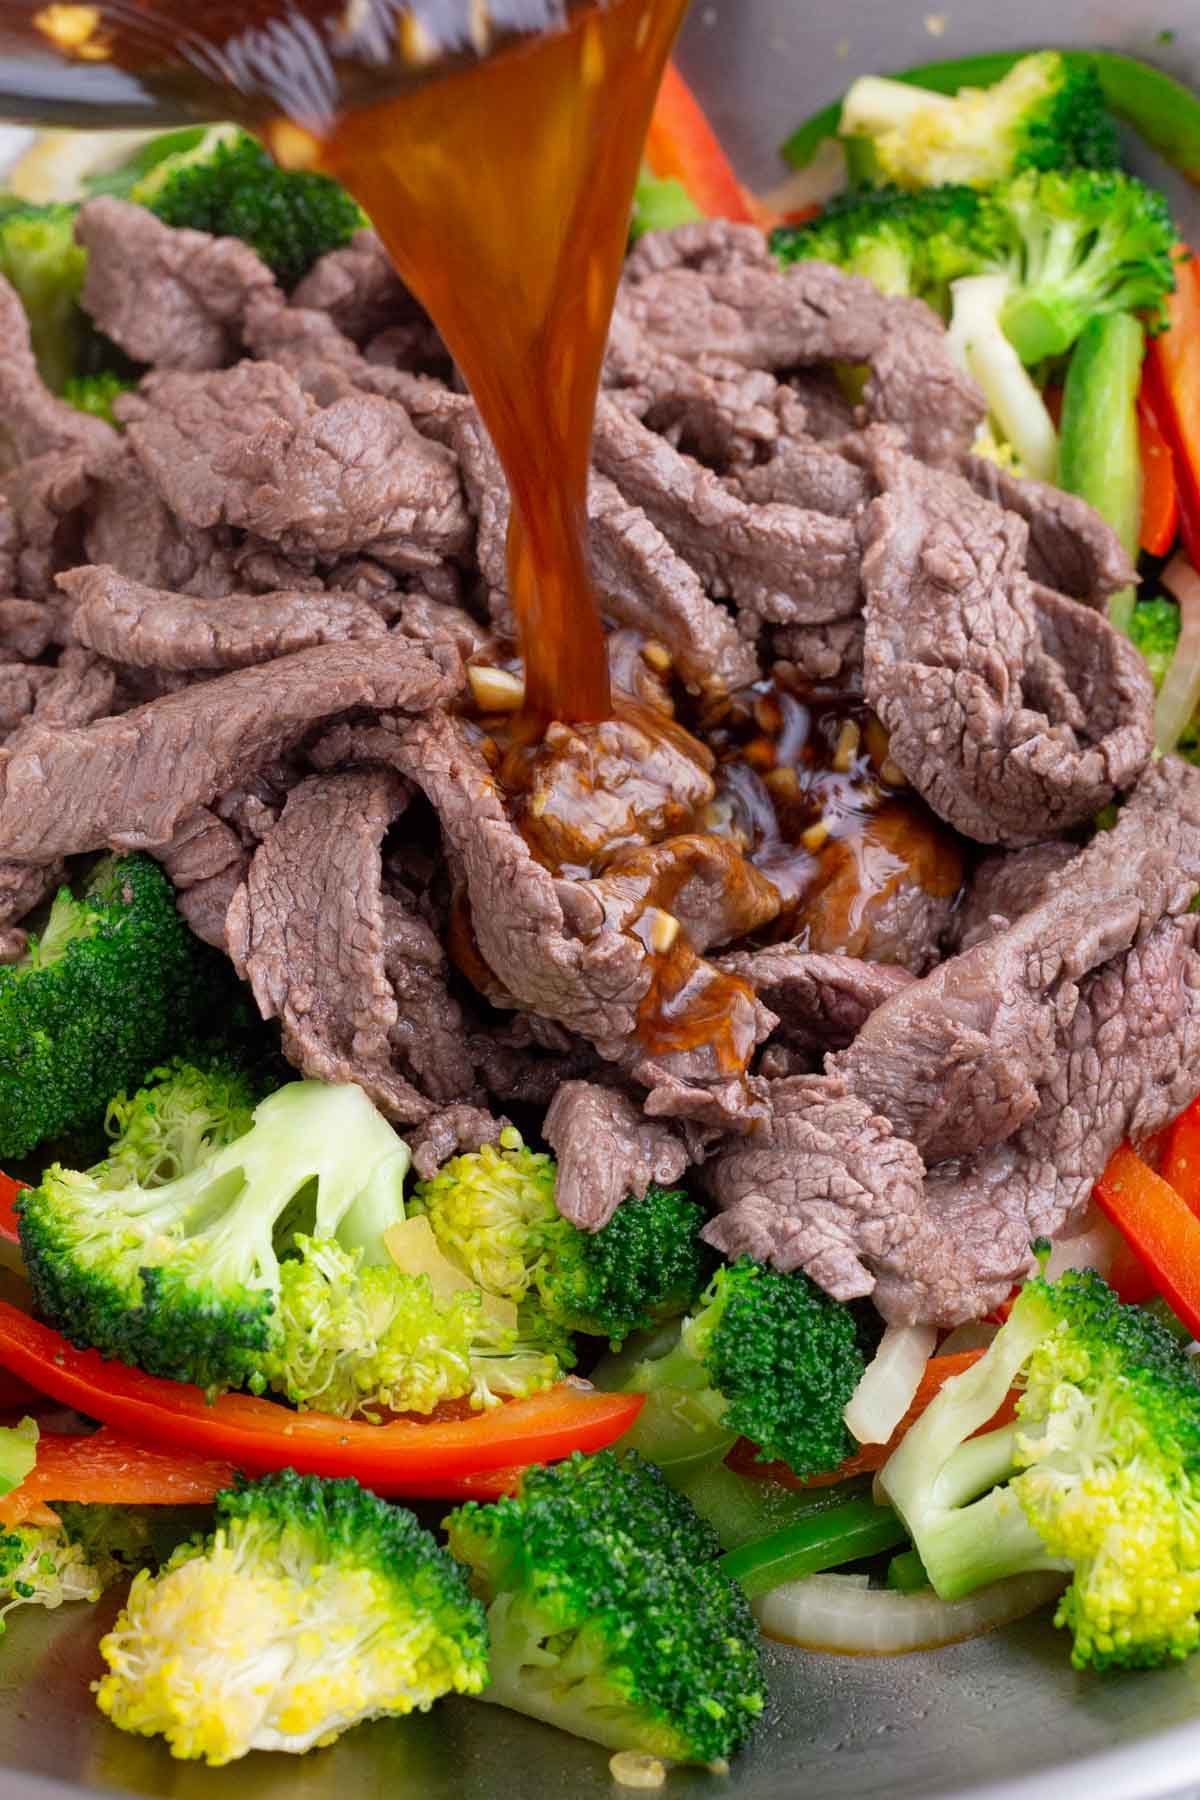 Cooked steak is added back to the veggies and sauce is poured over everything.